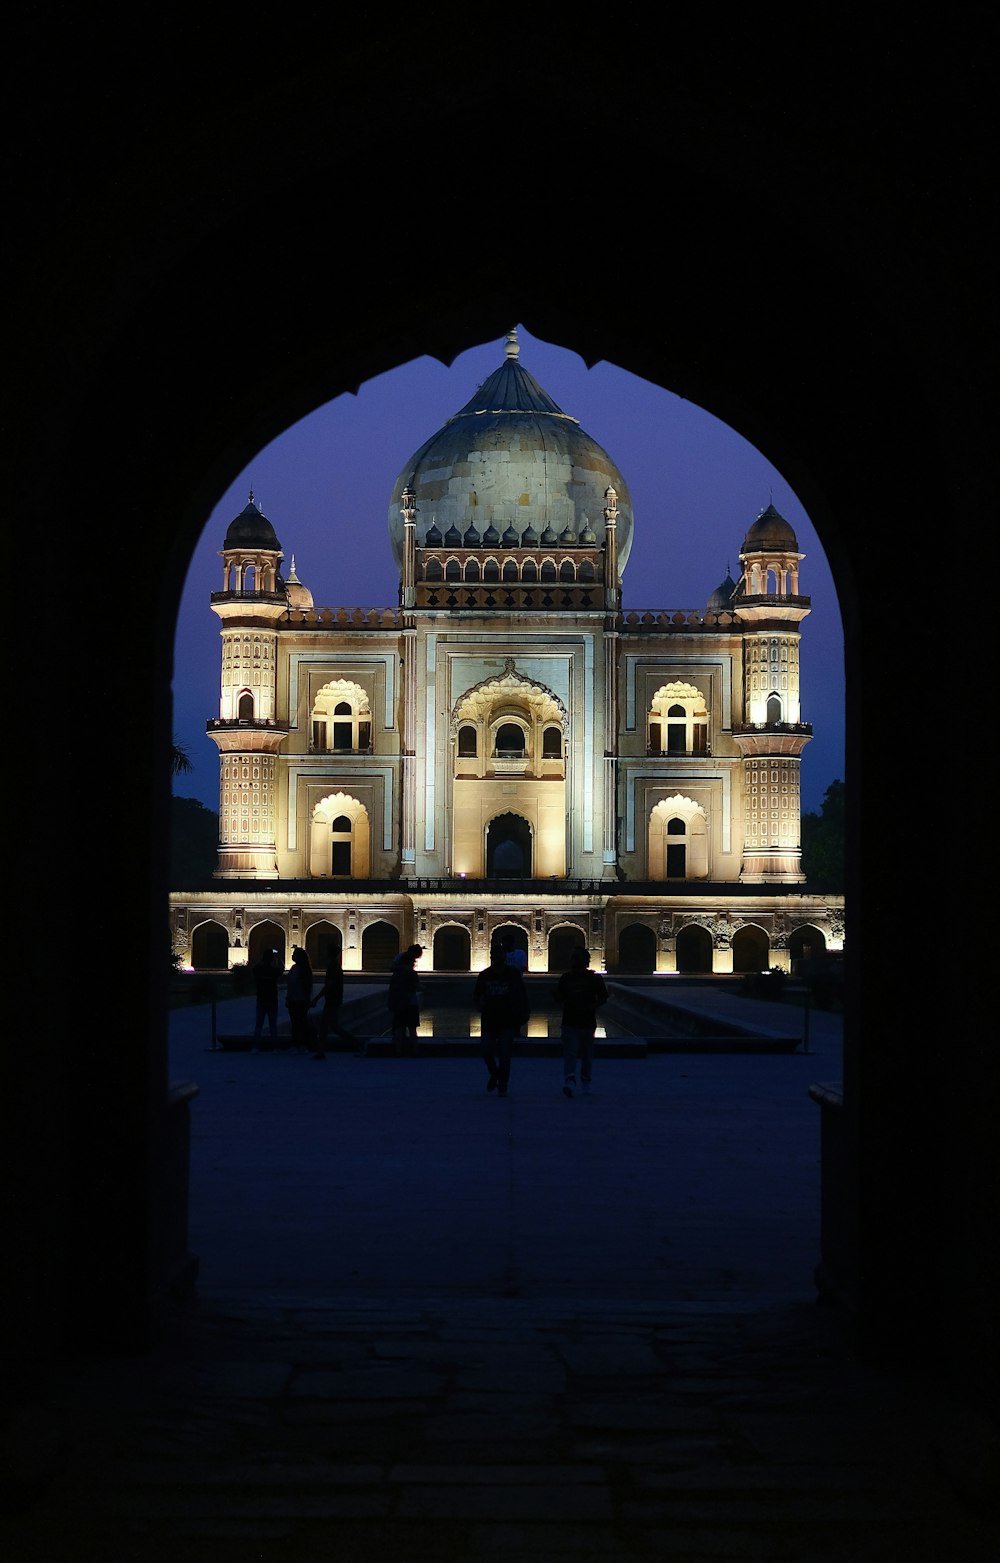 a view of a building through an archway at night